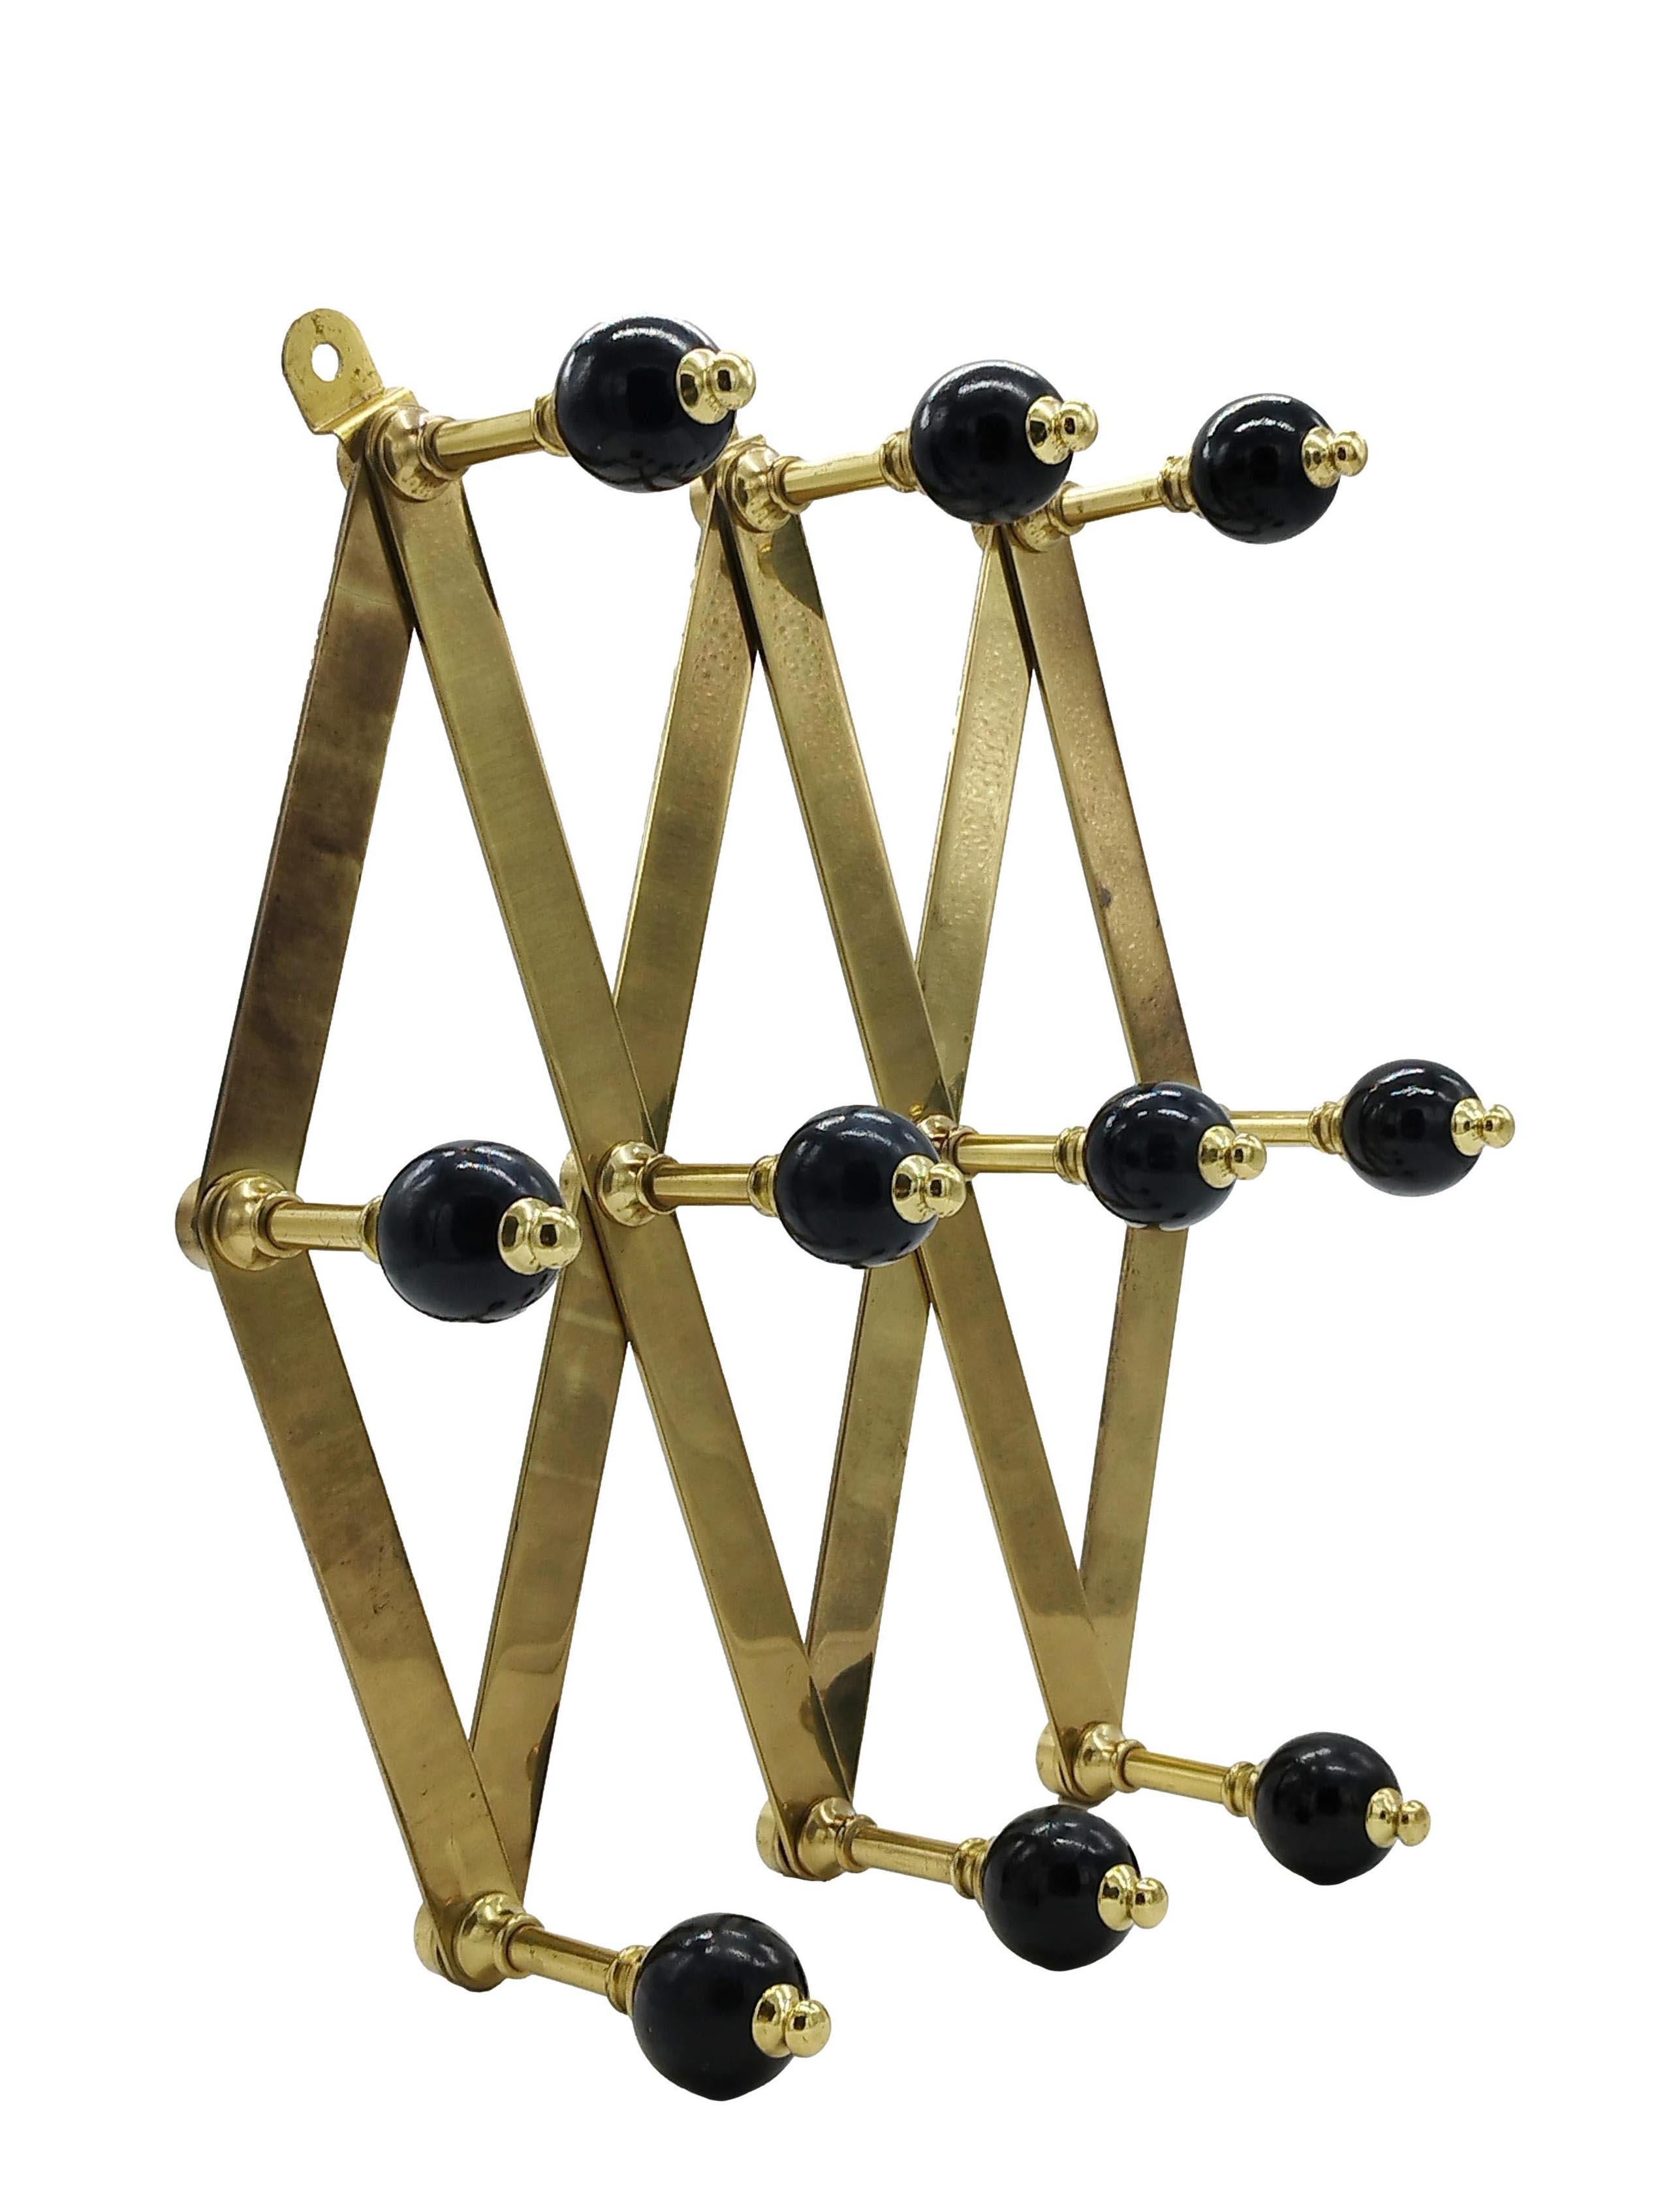 Adjustable brass and Bakelite coat stand by Luigi Caccia Dominioni for Azucena. Adjustable brass frame with black Bakelite knobs.
Very good condition: the brass has been polished, but shows little oxidation as can be seen in the photos.

